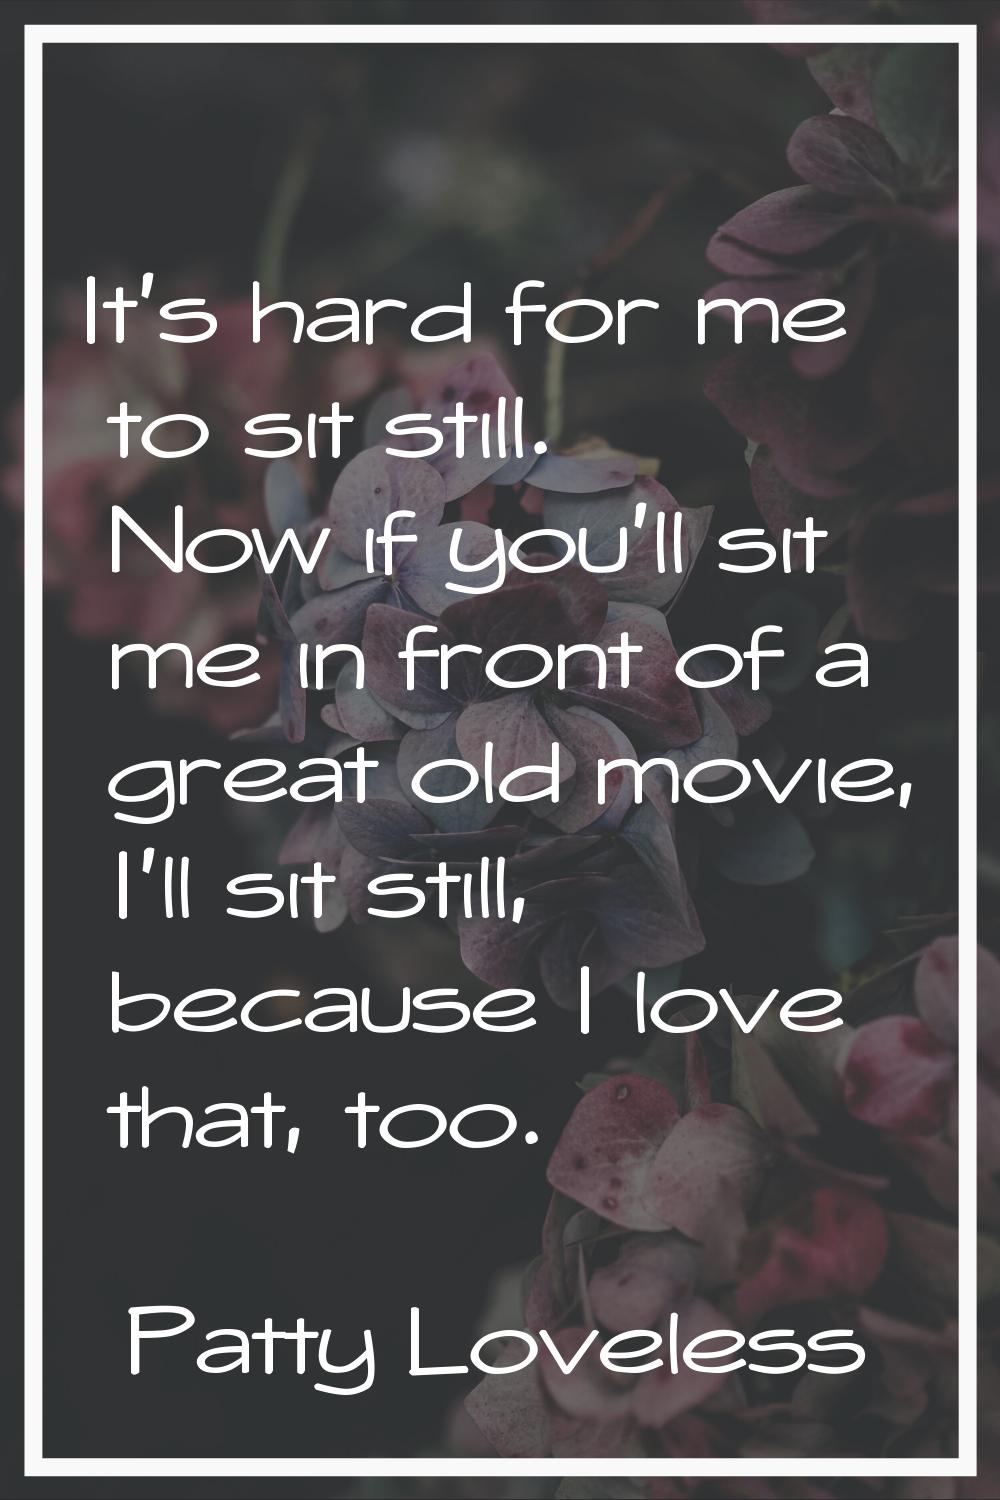 It's hard for me to sit still. Now if you'll sit me in front of a great old movie, I'll sit still, 